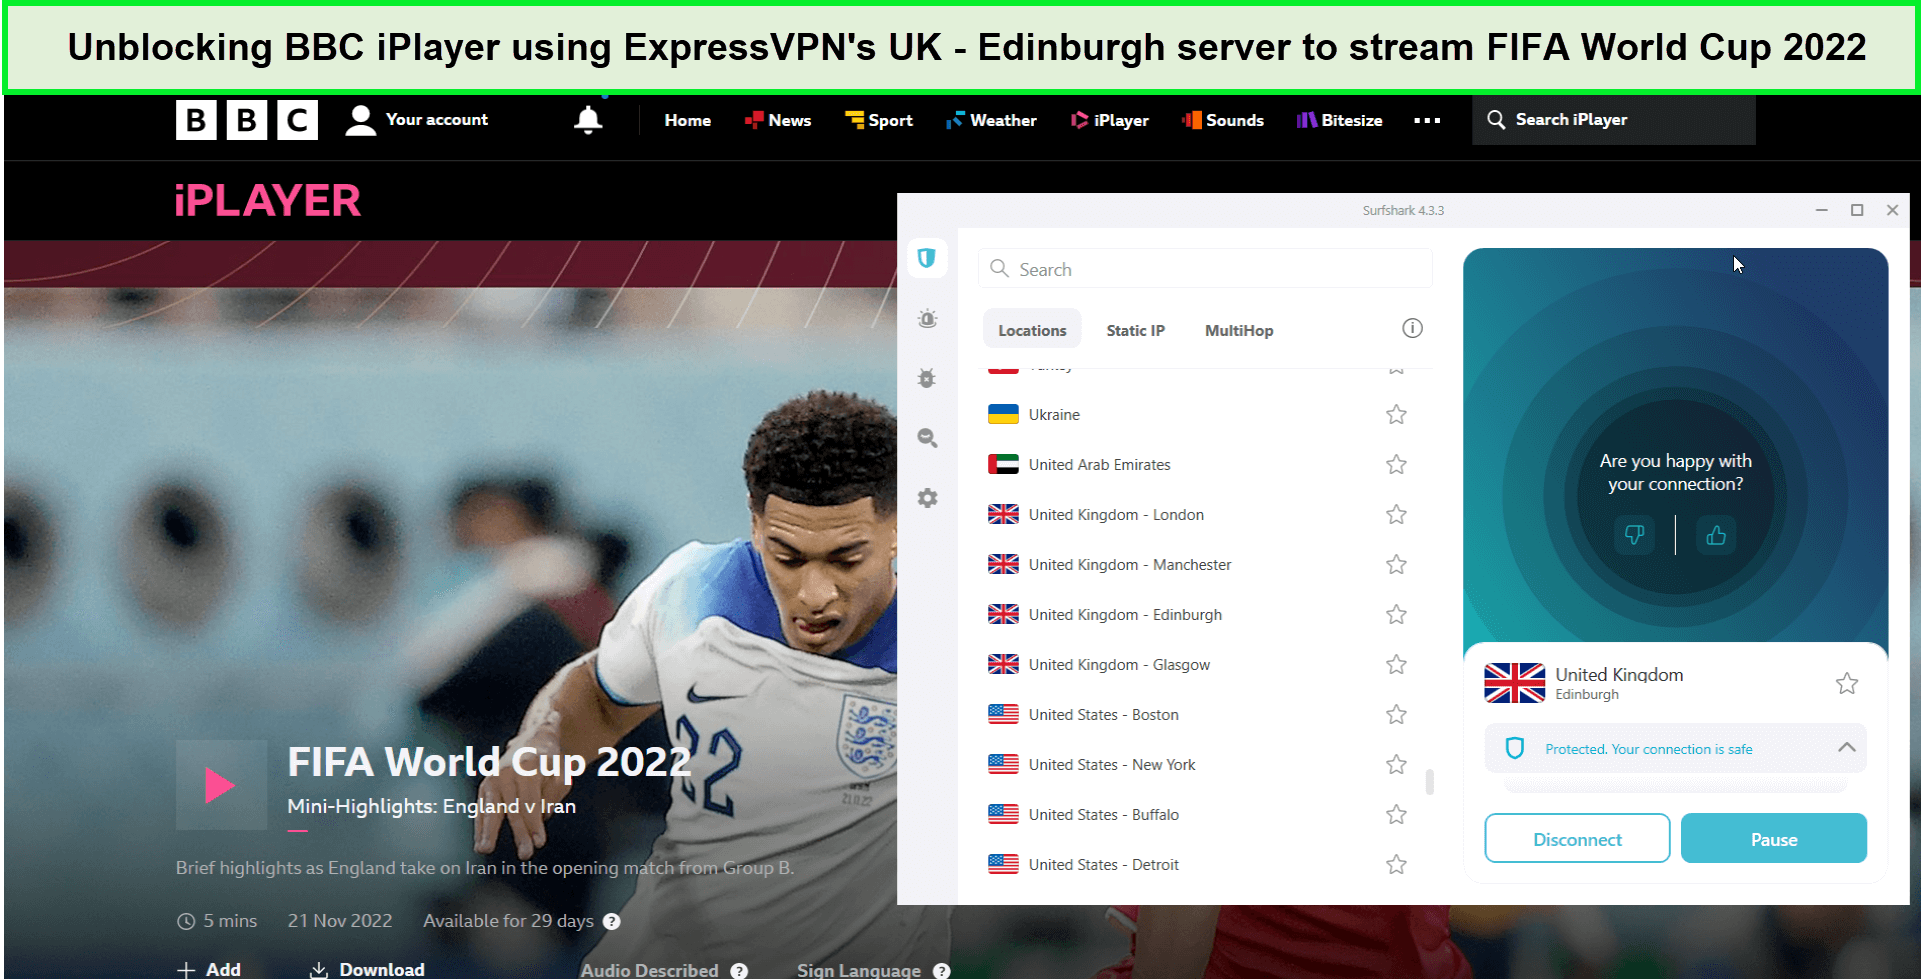 websites to watch world cup 2022